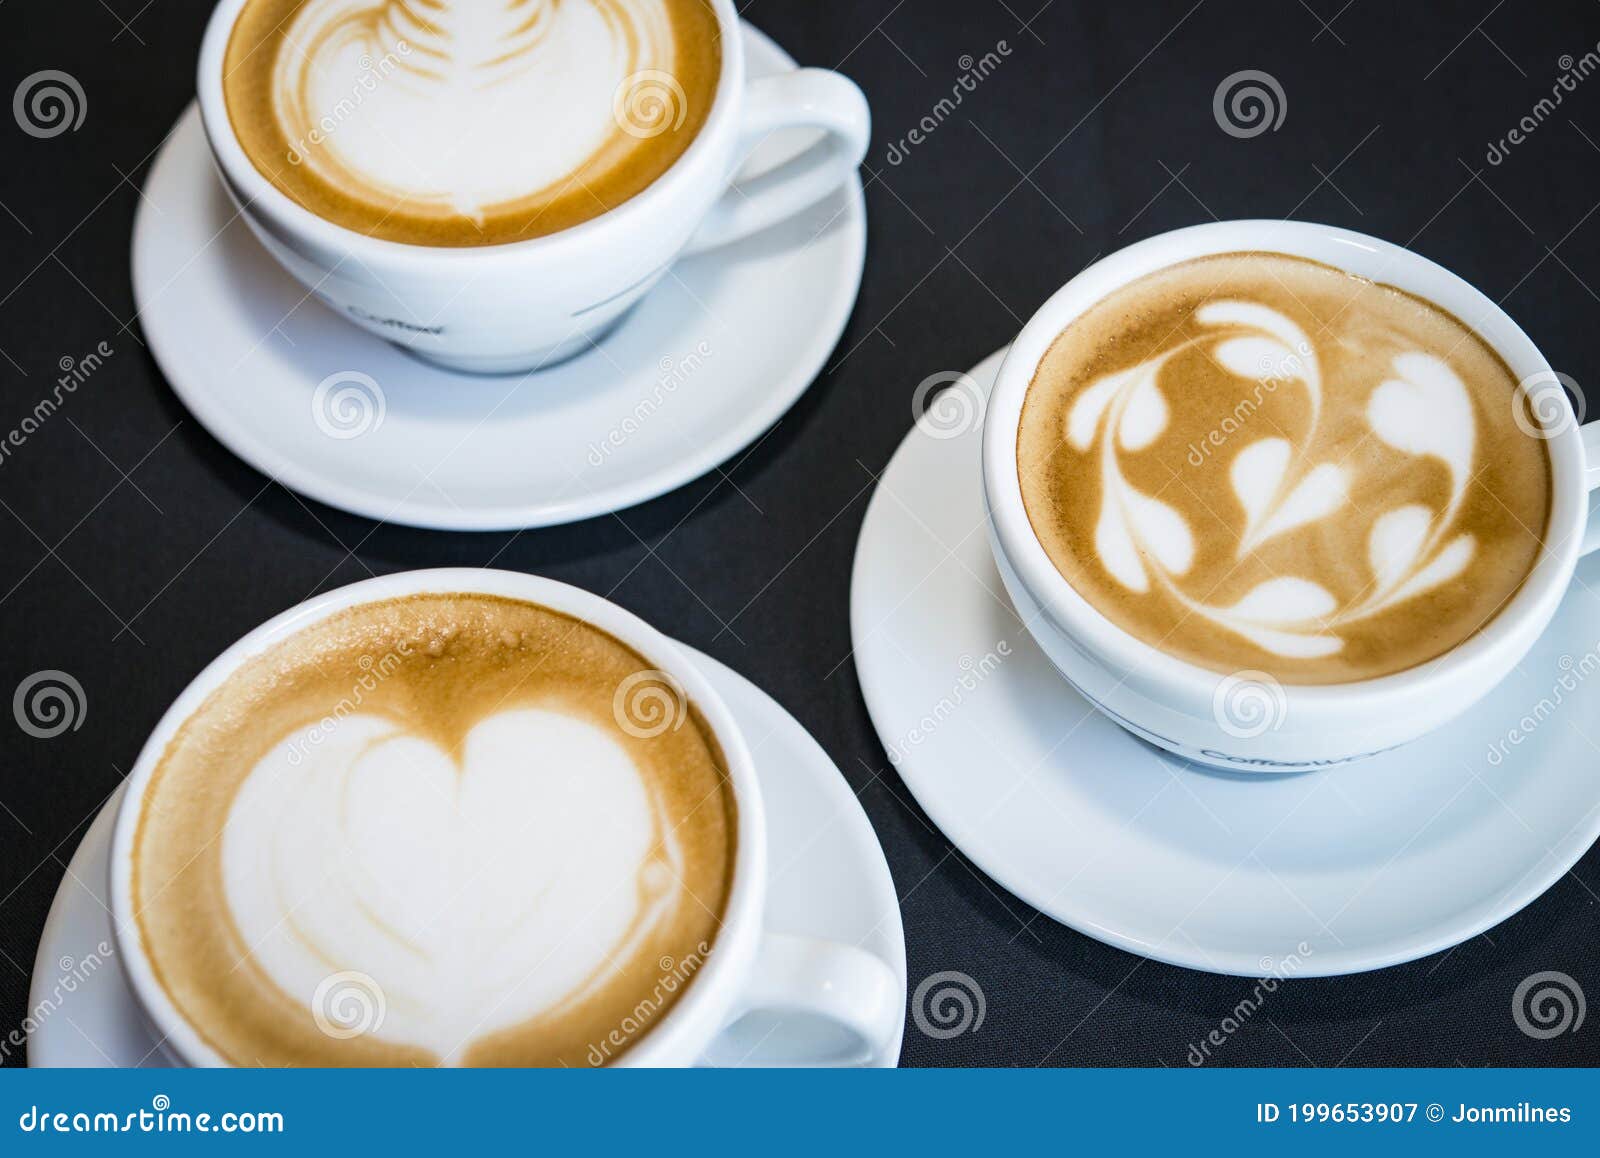 three cups of hot cappuccino coffees